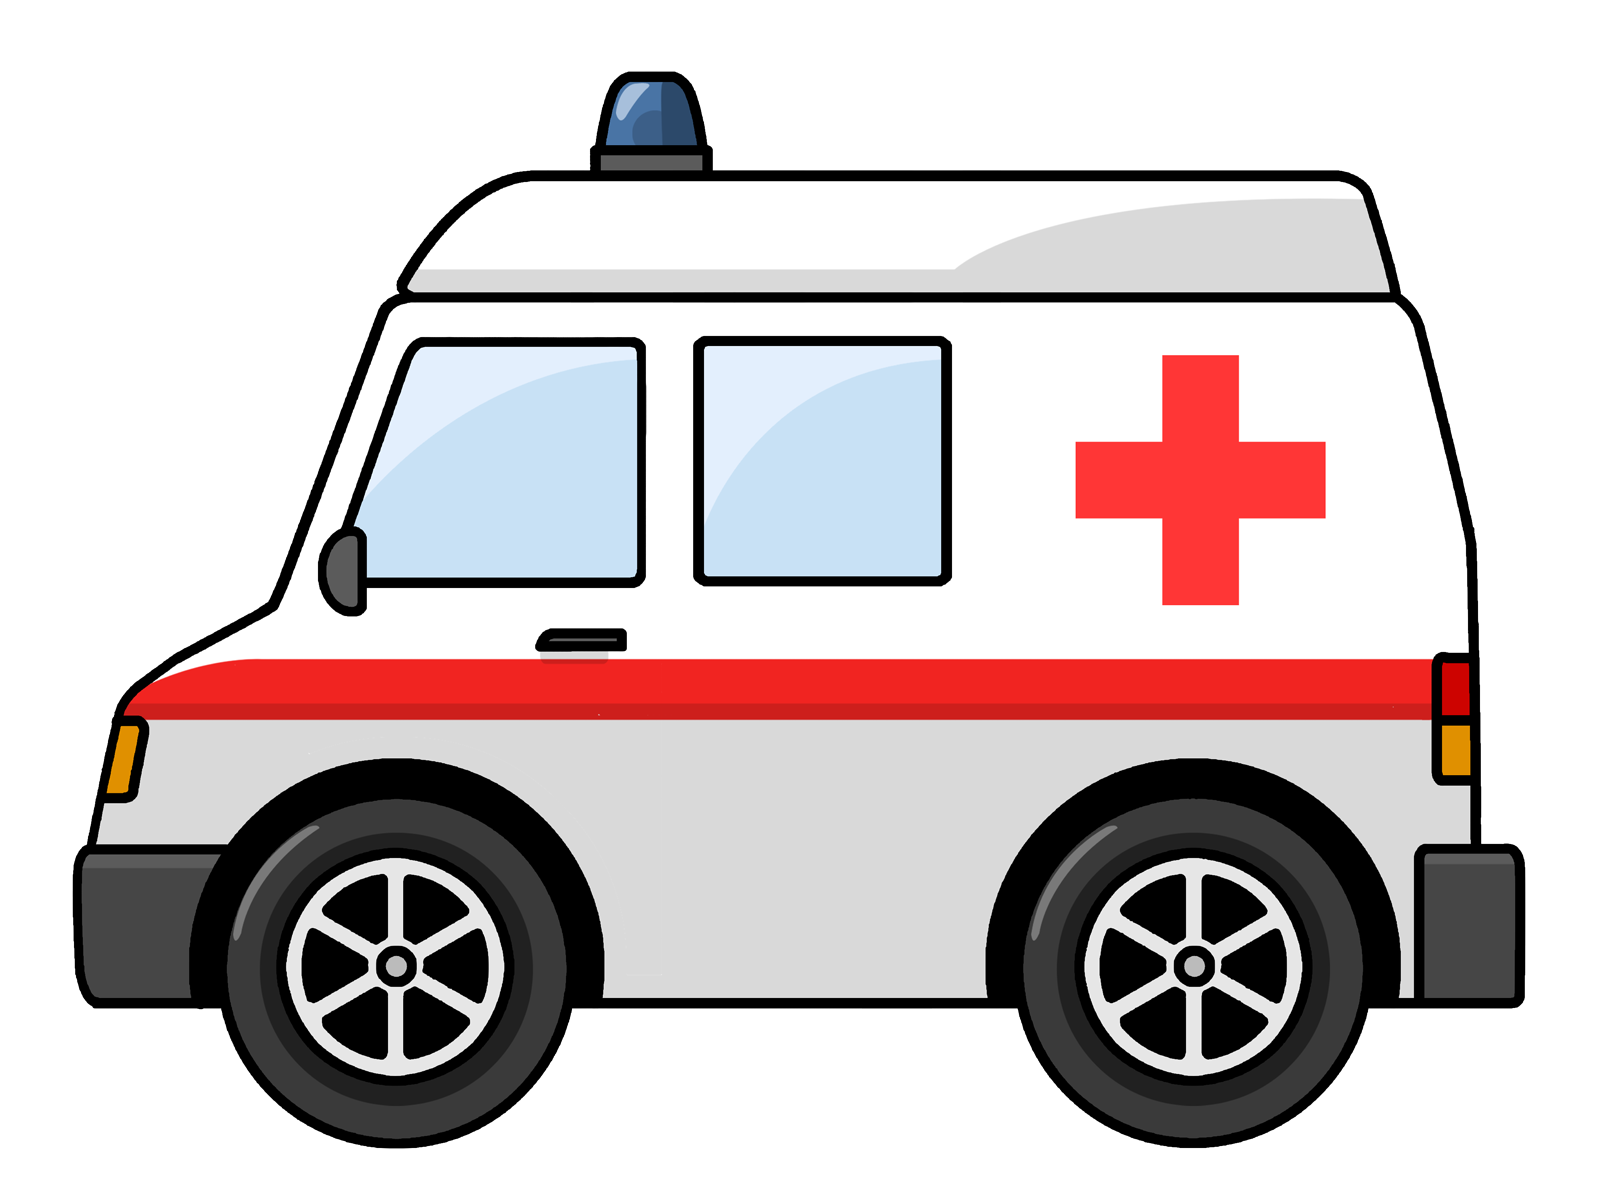 ambulance - Seeing an ambulance is very unlucky unless you pinch your nose  or hold your